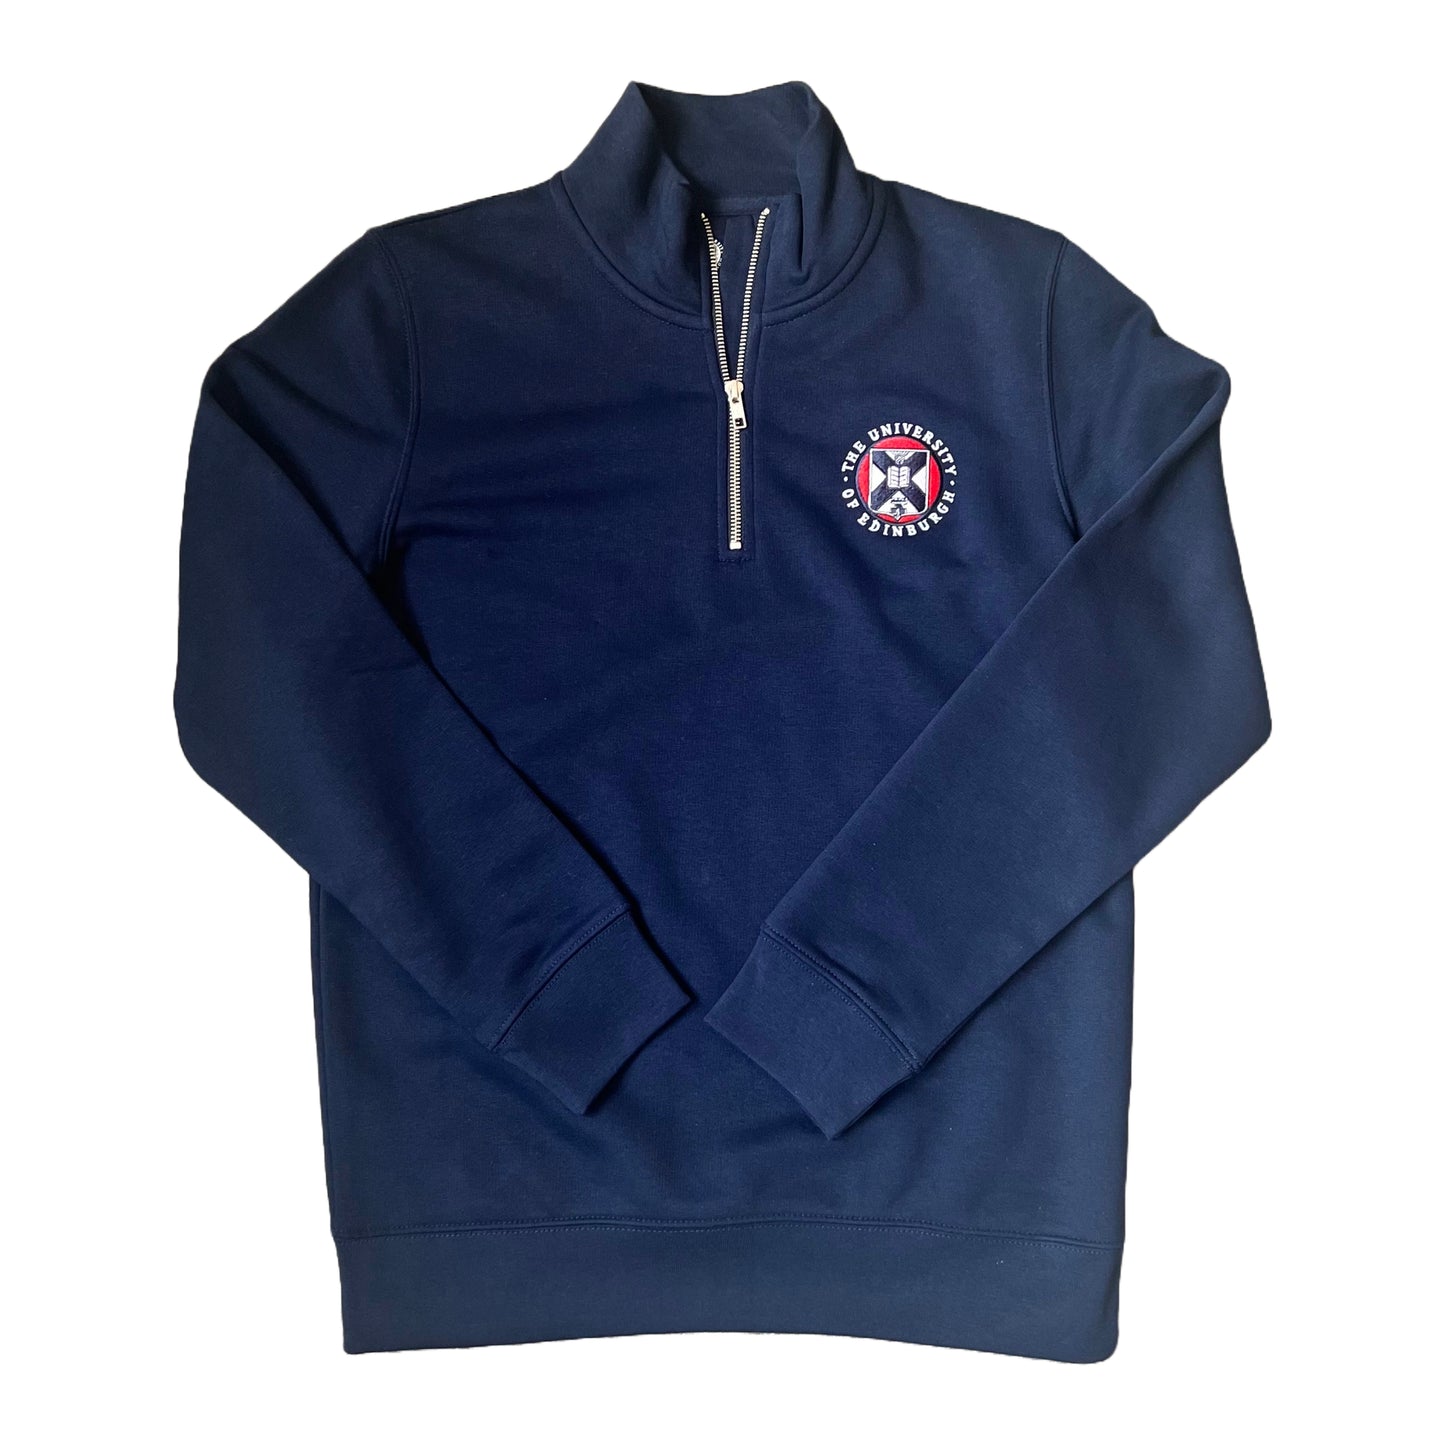 Quarterzip sweatshirt in Navy with full colour embroidery of the crest on the breast.